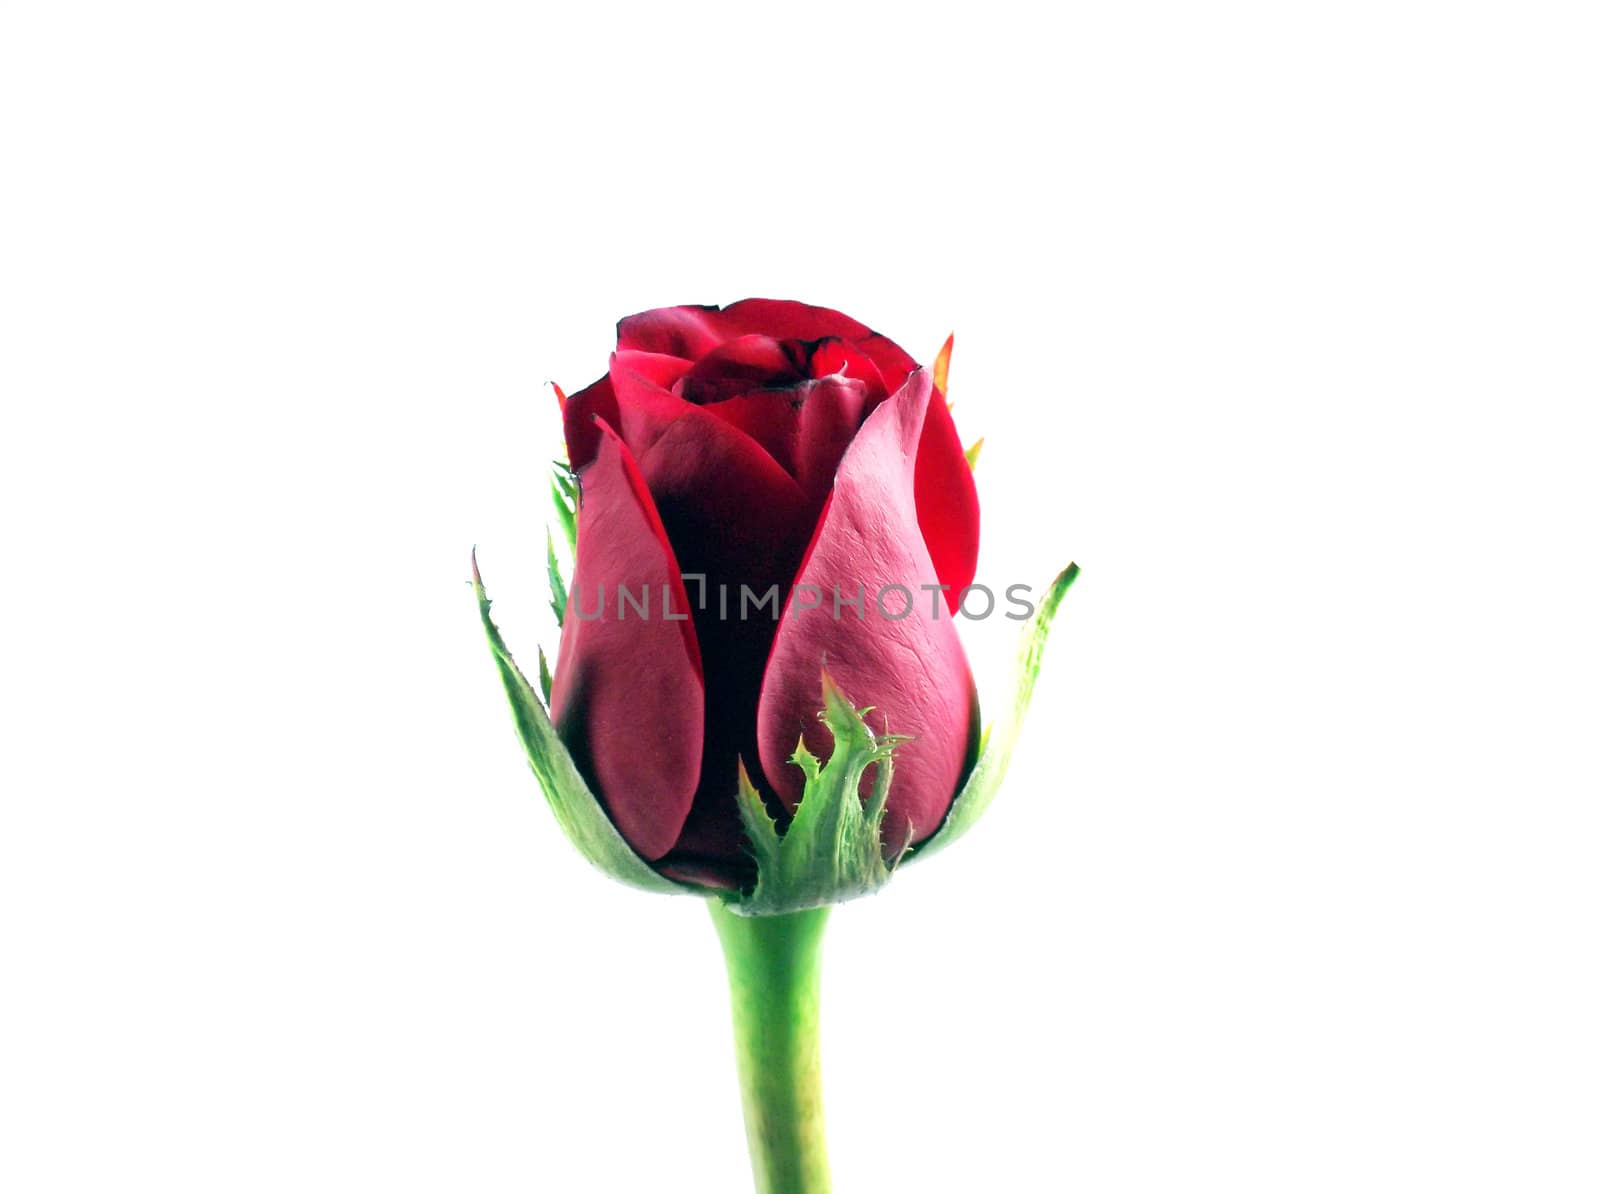 Red rose on the white background and copy space for text.